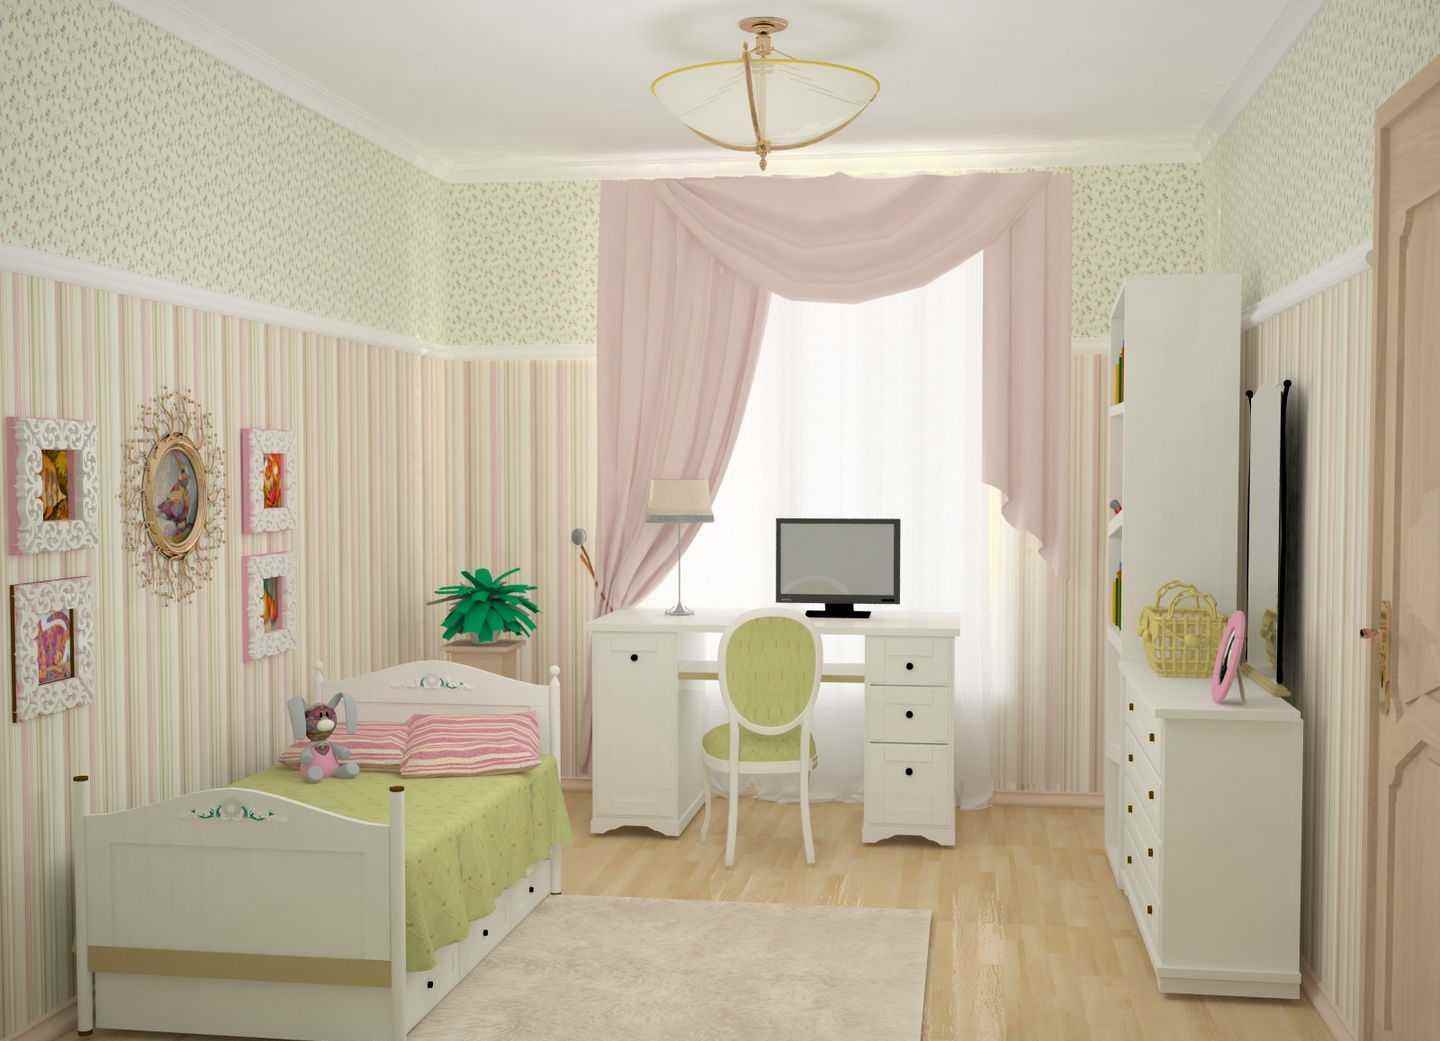 version of the bright decor of the children's room for the girl